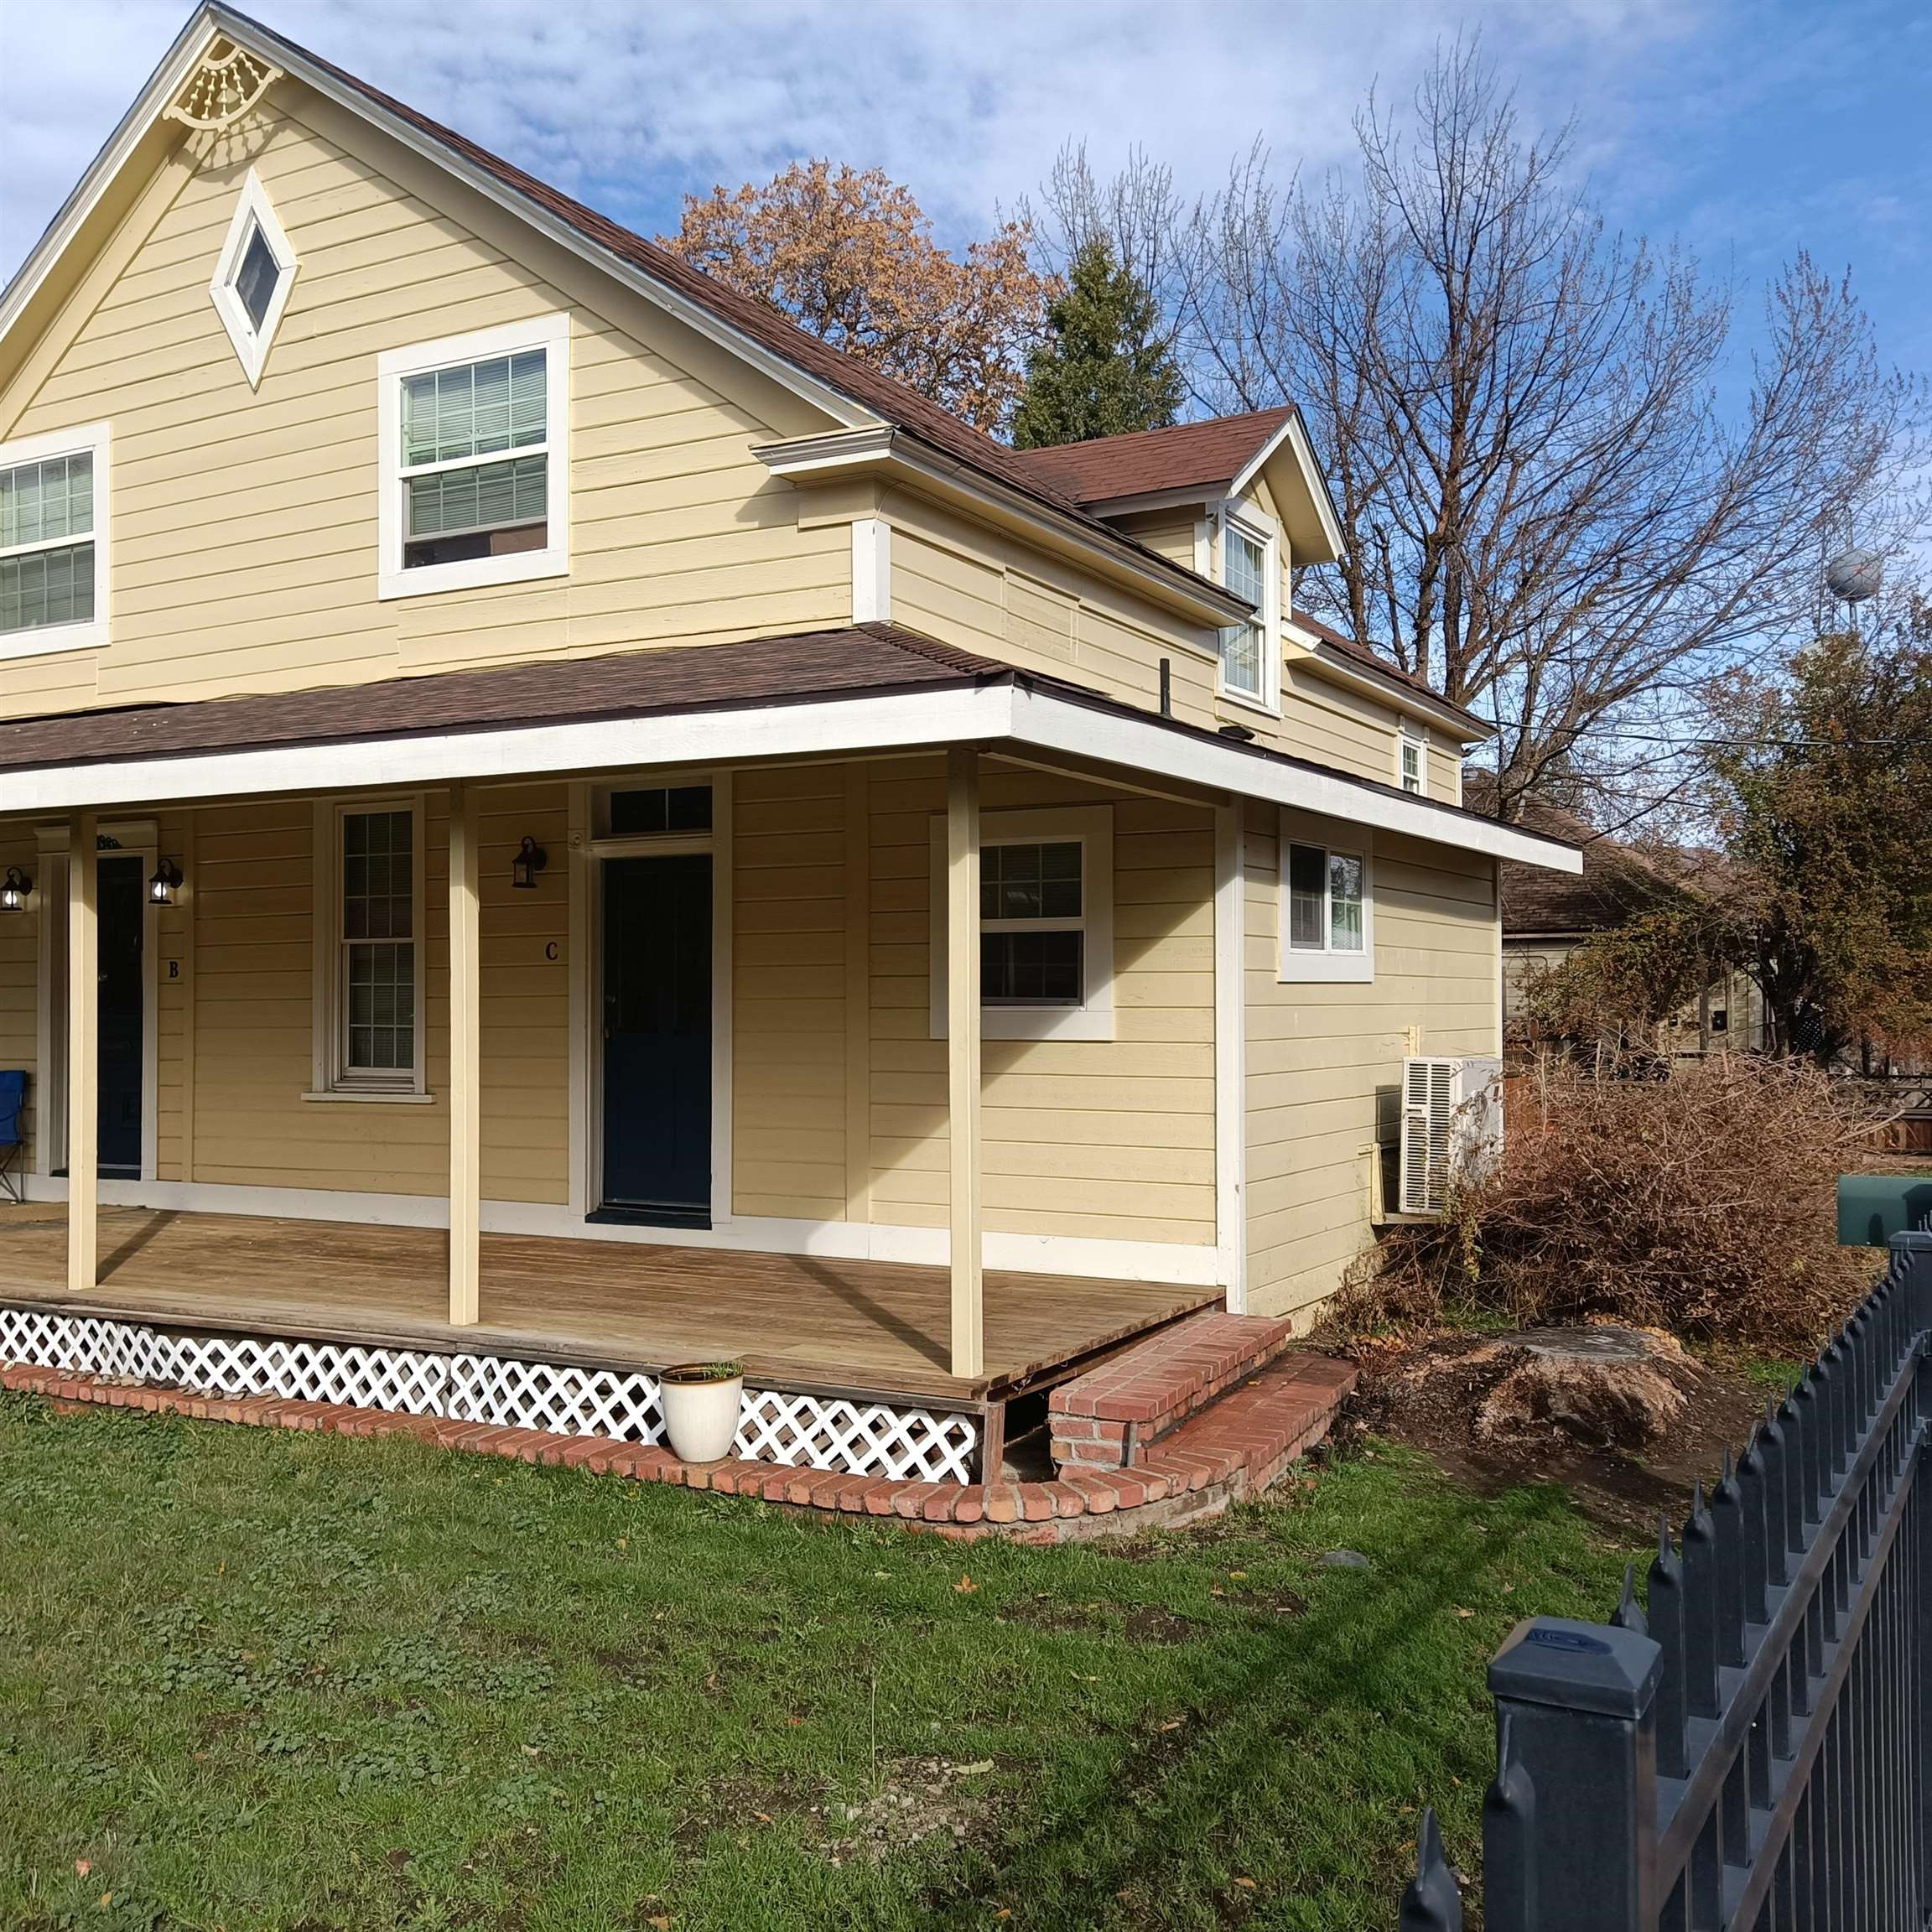 The property was remodeled in 2018. The present buyer bought for $180,000 and spent $220,000 on renovations. The main property can be 2 units, 1st floor is 2bed/1 ba with an additional mother in law with own bedroom and bath and kitchen or can use whole downstairs as a 3bed/2ba with 2 kitchens. The upstairs unit is 3bed/2 bath with full kitchen. There is a seperate cottage that is 1bed/1ba with kitchen, completely remodeled ( has it's own address 508 Yama) Also, the property borders the commercial district, therefore conditional use permit may be allowed to turn the cottage or main house into an office, retail or commercial work space. ( buyer to verify). additionally the property offers a 3 Bay parking structure + 1 car garage,  and workshop or storage behind carports. There are multiple heat sources including Keroscene and forced air, and air conditioning via Trane.There is a sprinkler system in the front lawn and the property offers a huge back garden area  Also has a full basement area that's over six feet in height. Right now house is fully rented bringing in $3300/mo. also cottage brings in $825/mo..($3750)Big Cash Cow